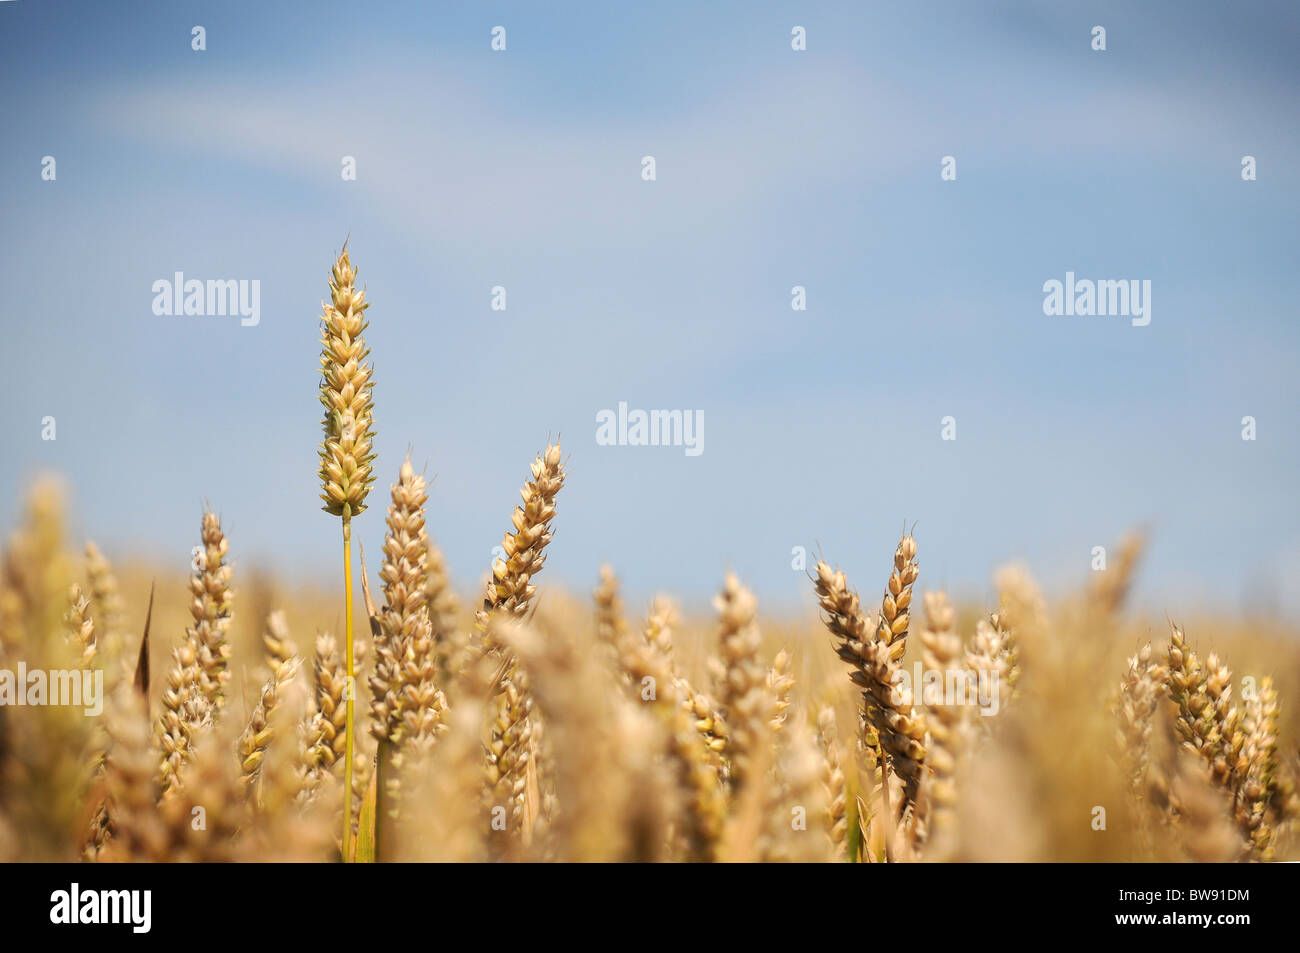 Ears of Wheat crop seen against a blue sky, selectivly focussing on one prominant one Stock Photo